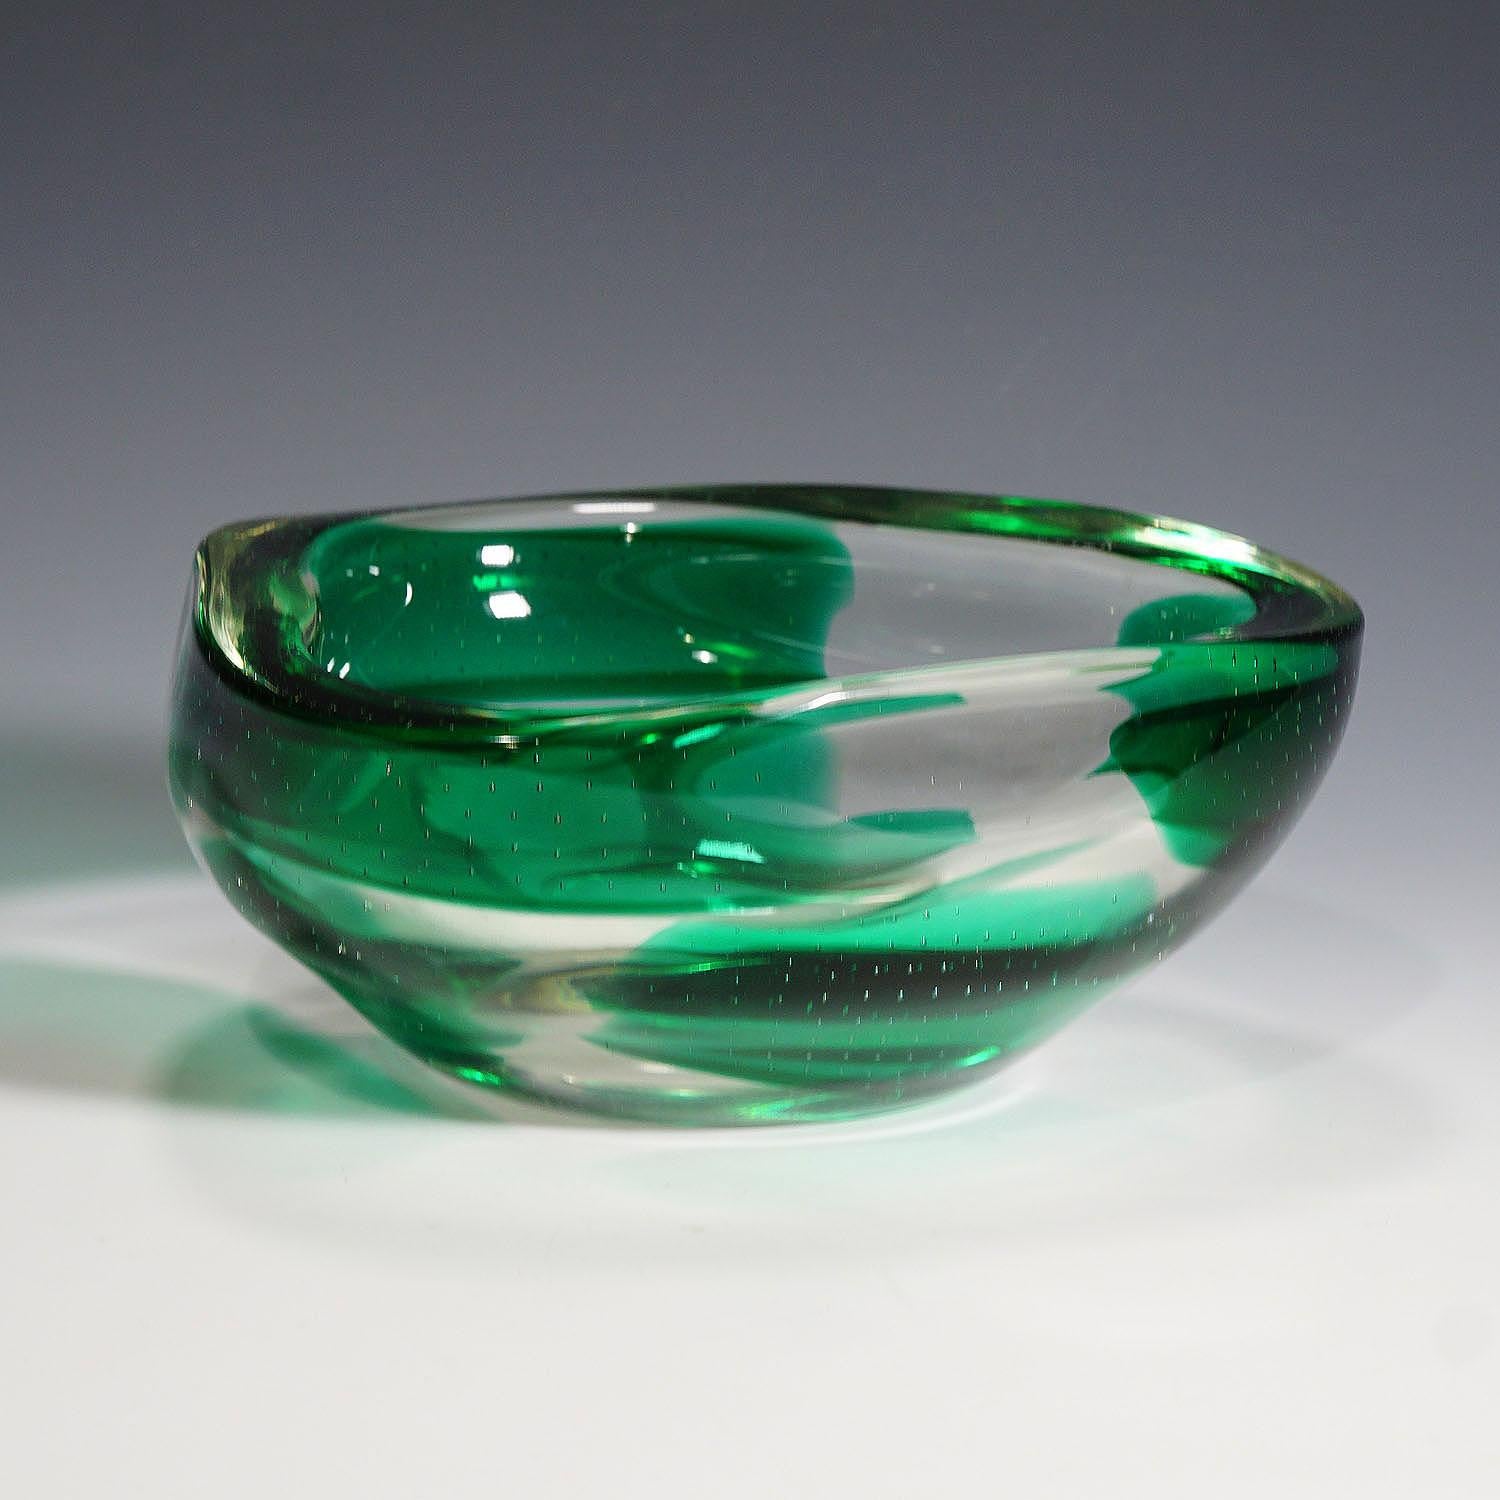 A large Venetian Sommerso glass bowl designed by Dino Martens and manufactured by Aureliano Toso in the 1940s. Thick clear glass with rectangular green spots and bubble areas.

Measures: Height 3.39